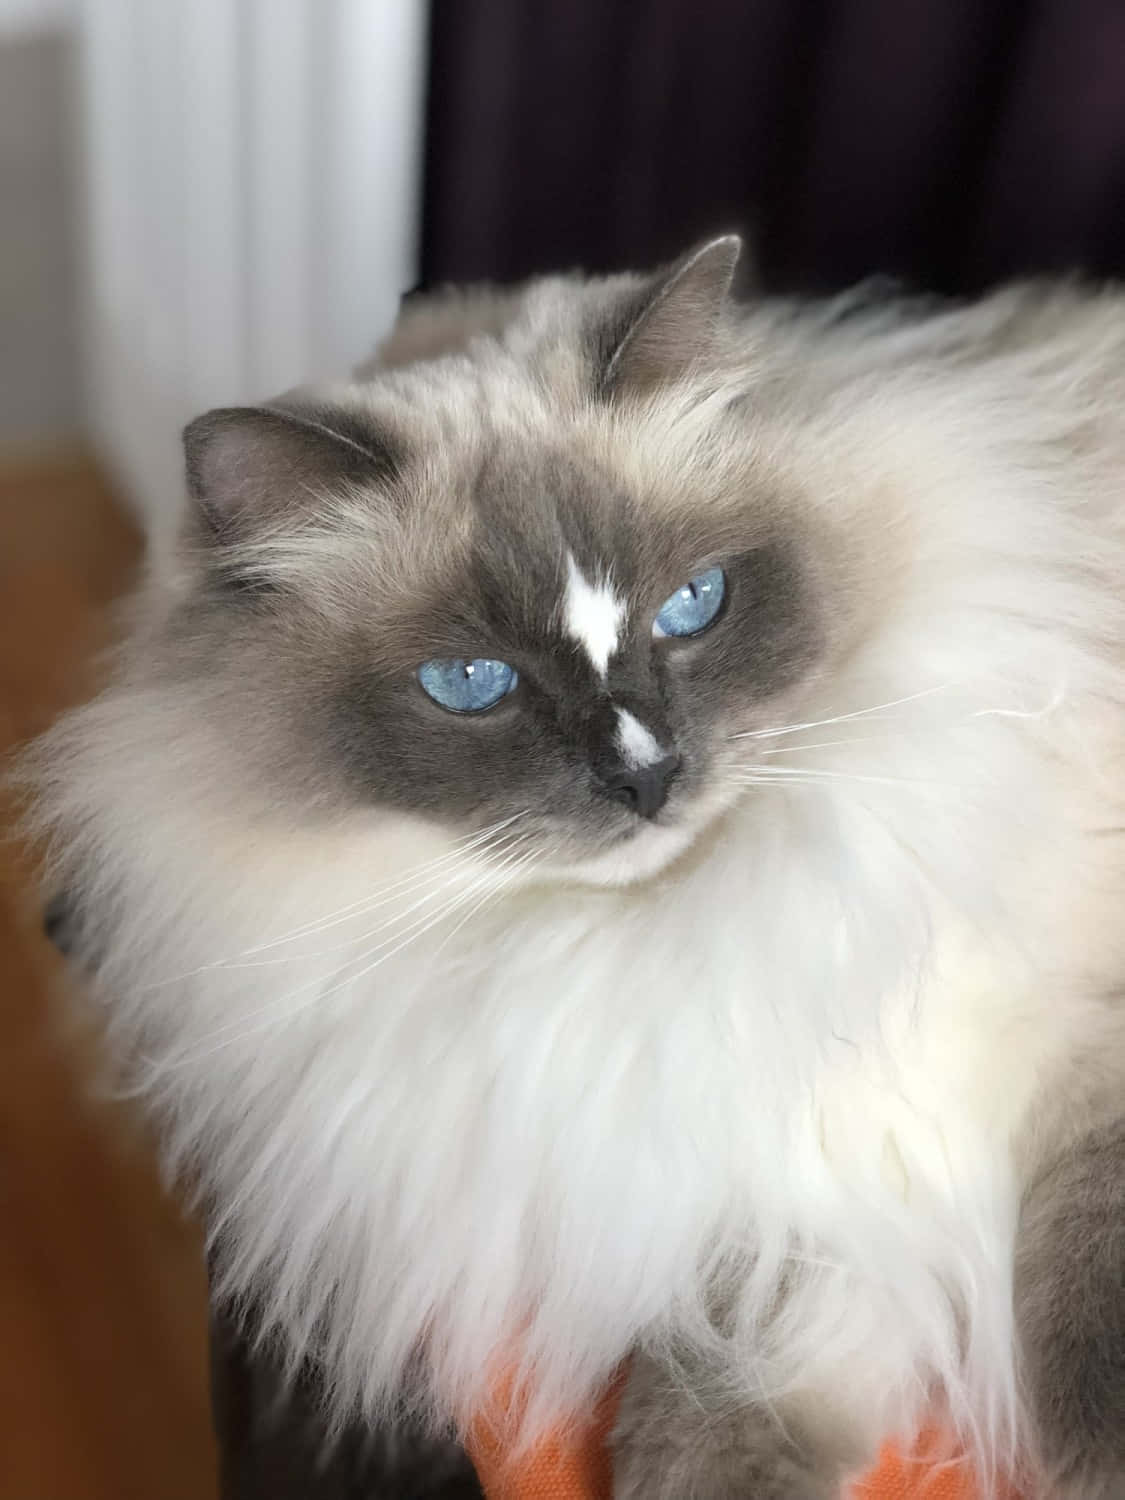 Adorable Ragdoll cat lounging on a cozy blanket Wallpaper